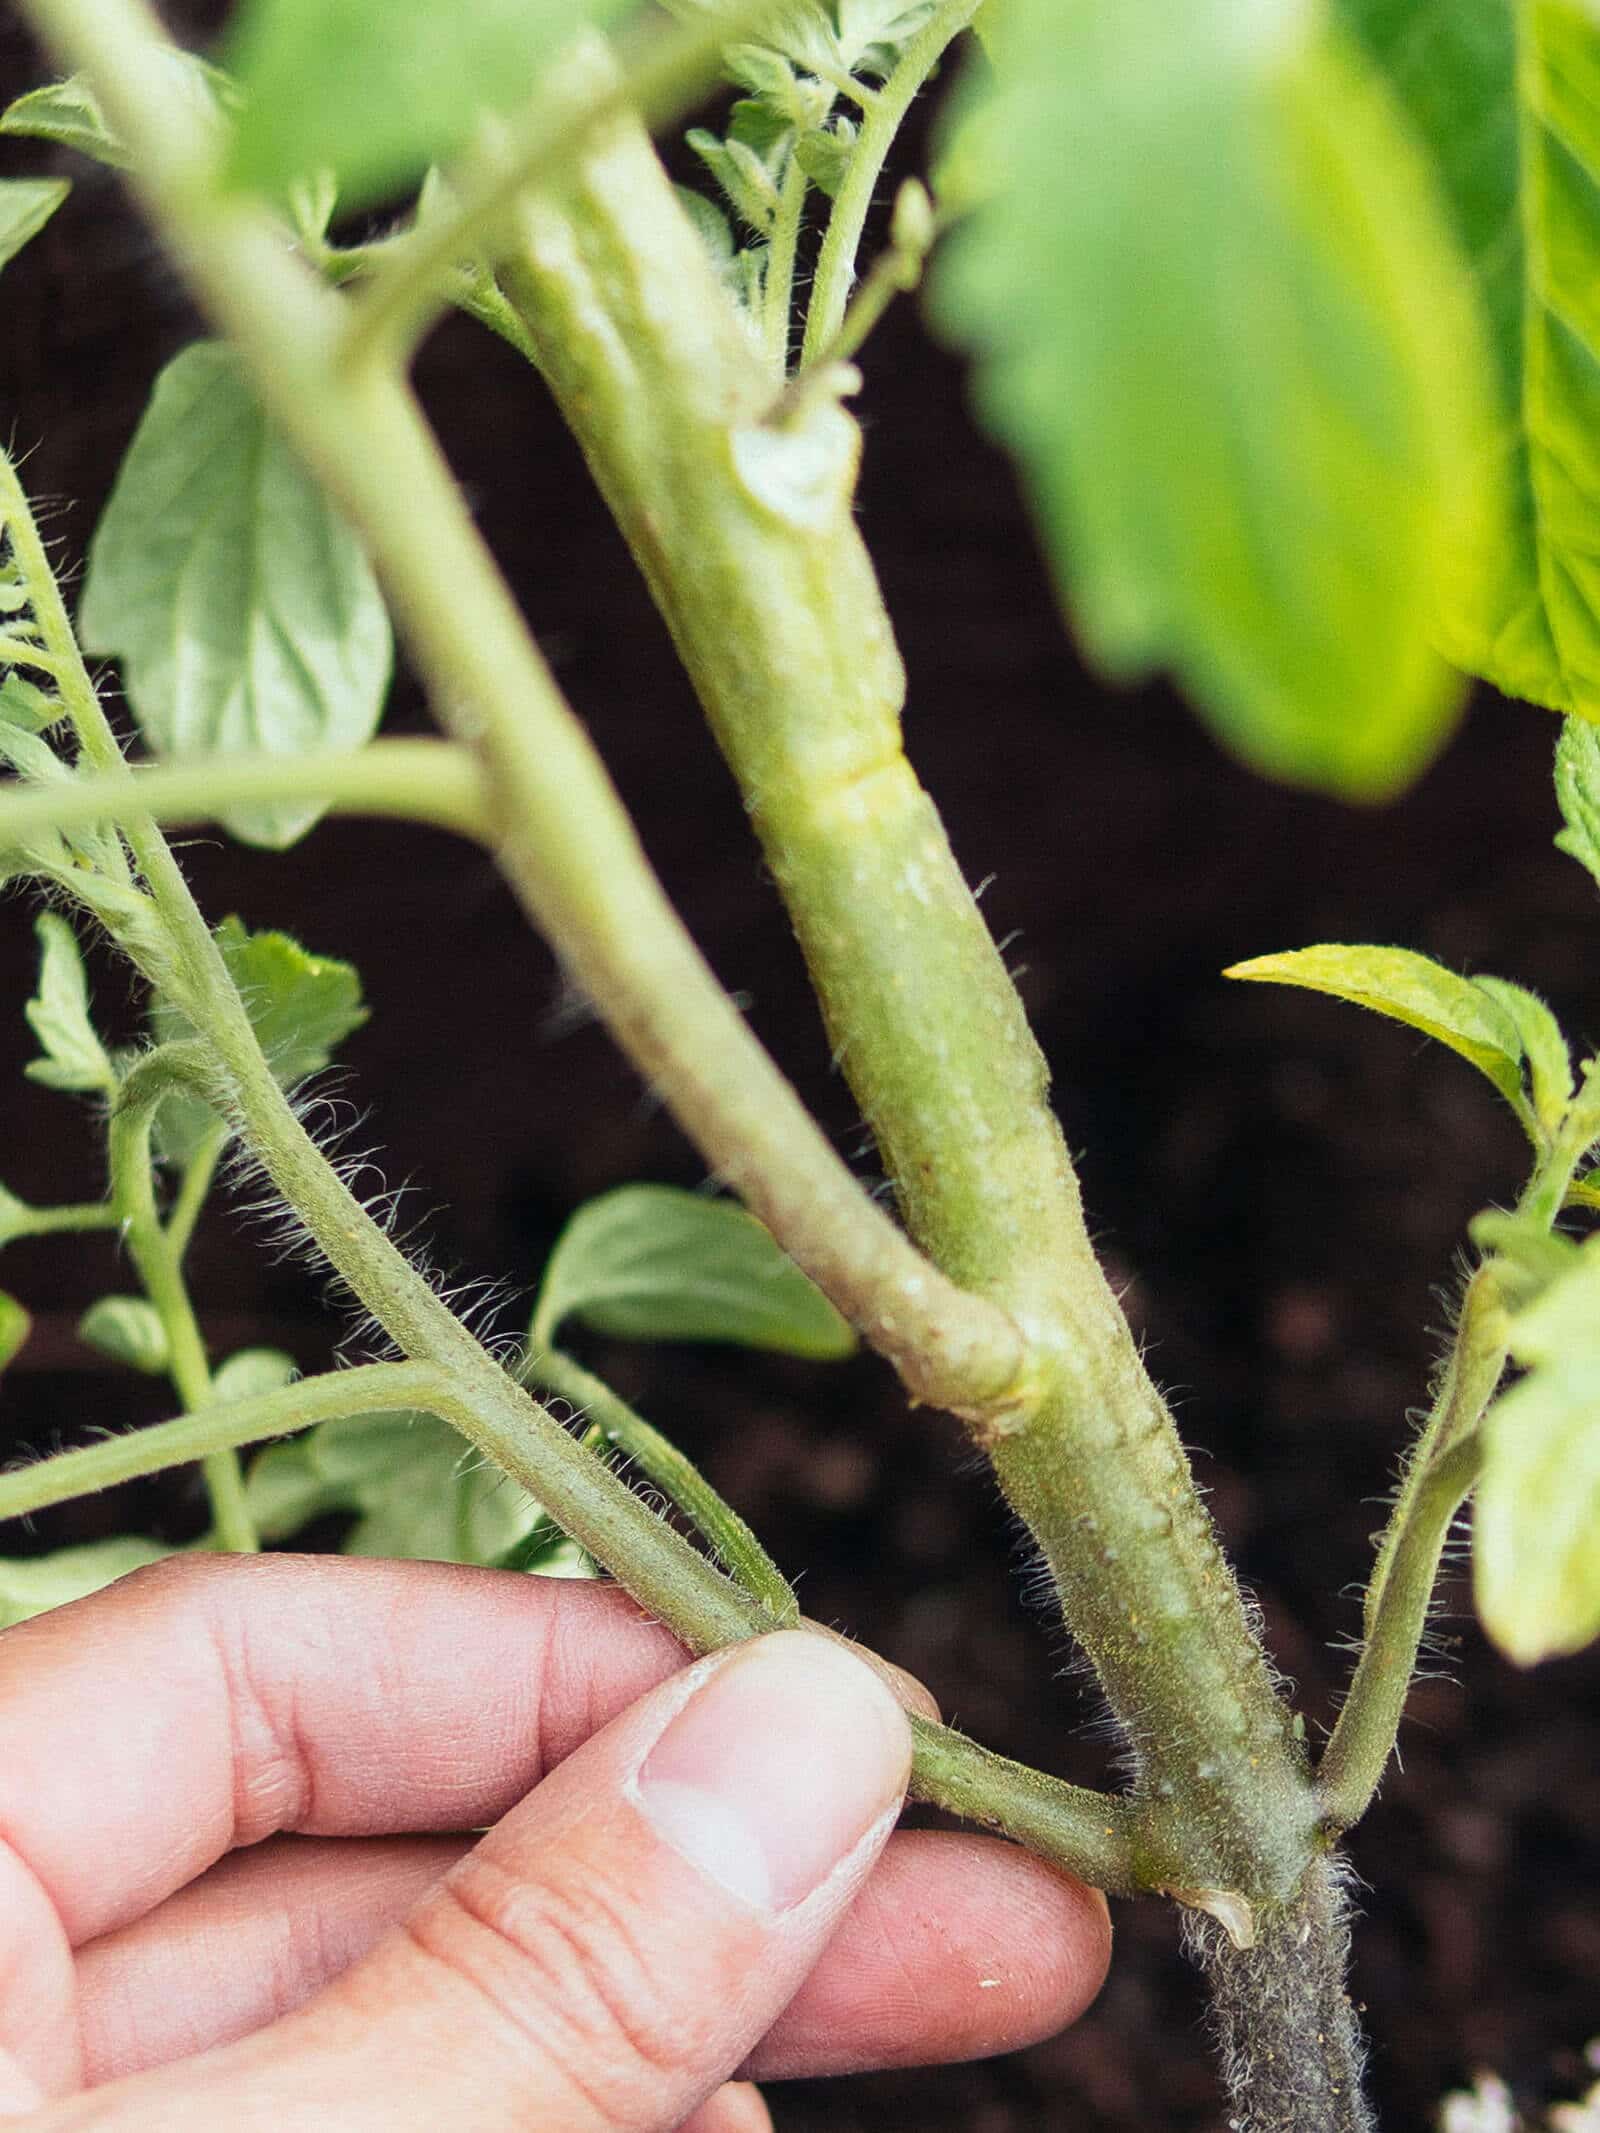 Tomato stem primordia (tiny bumps on the stem that are the earliest stage of root development)